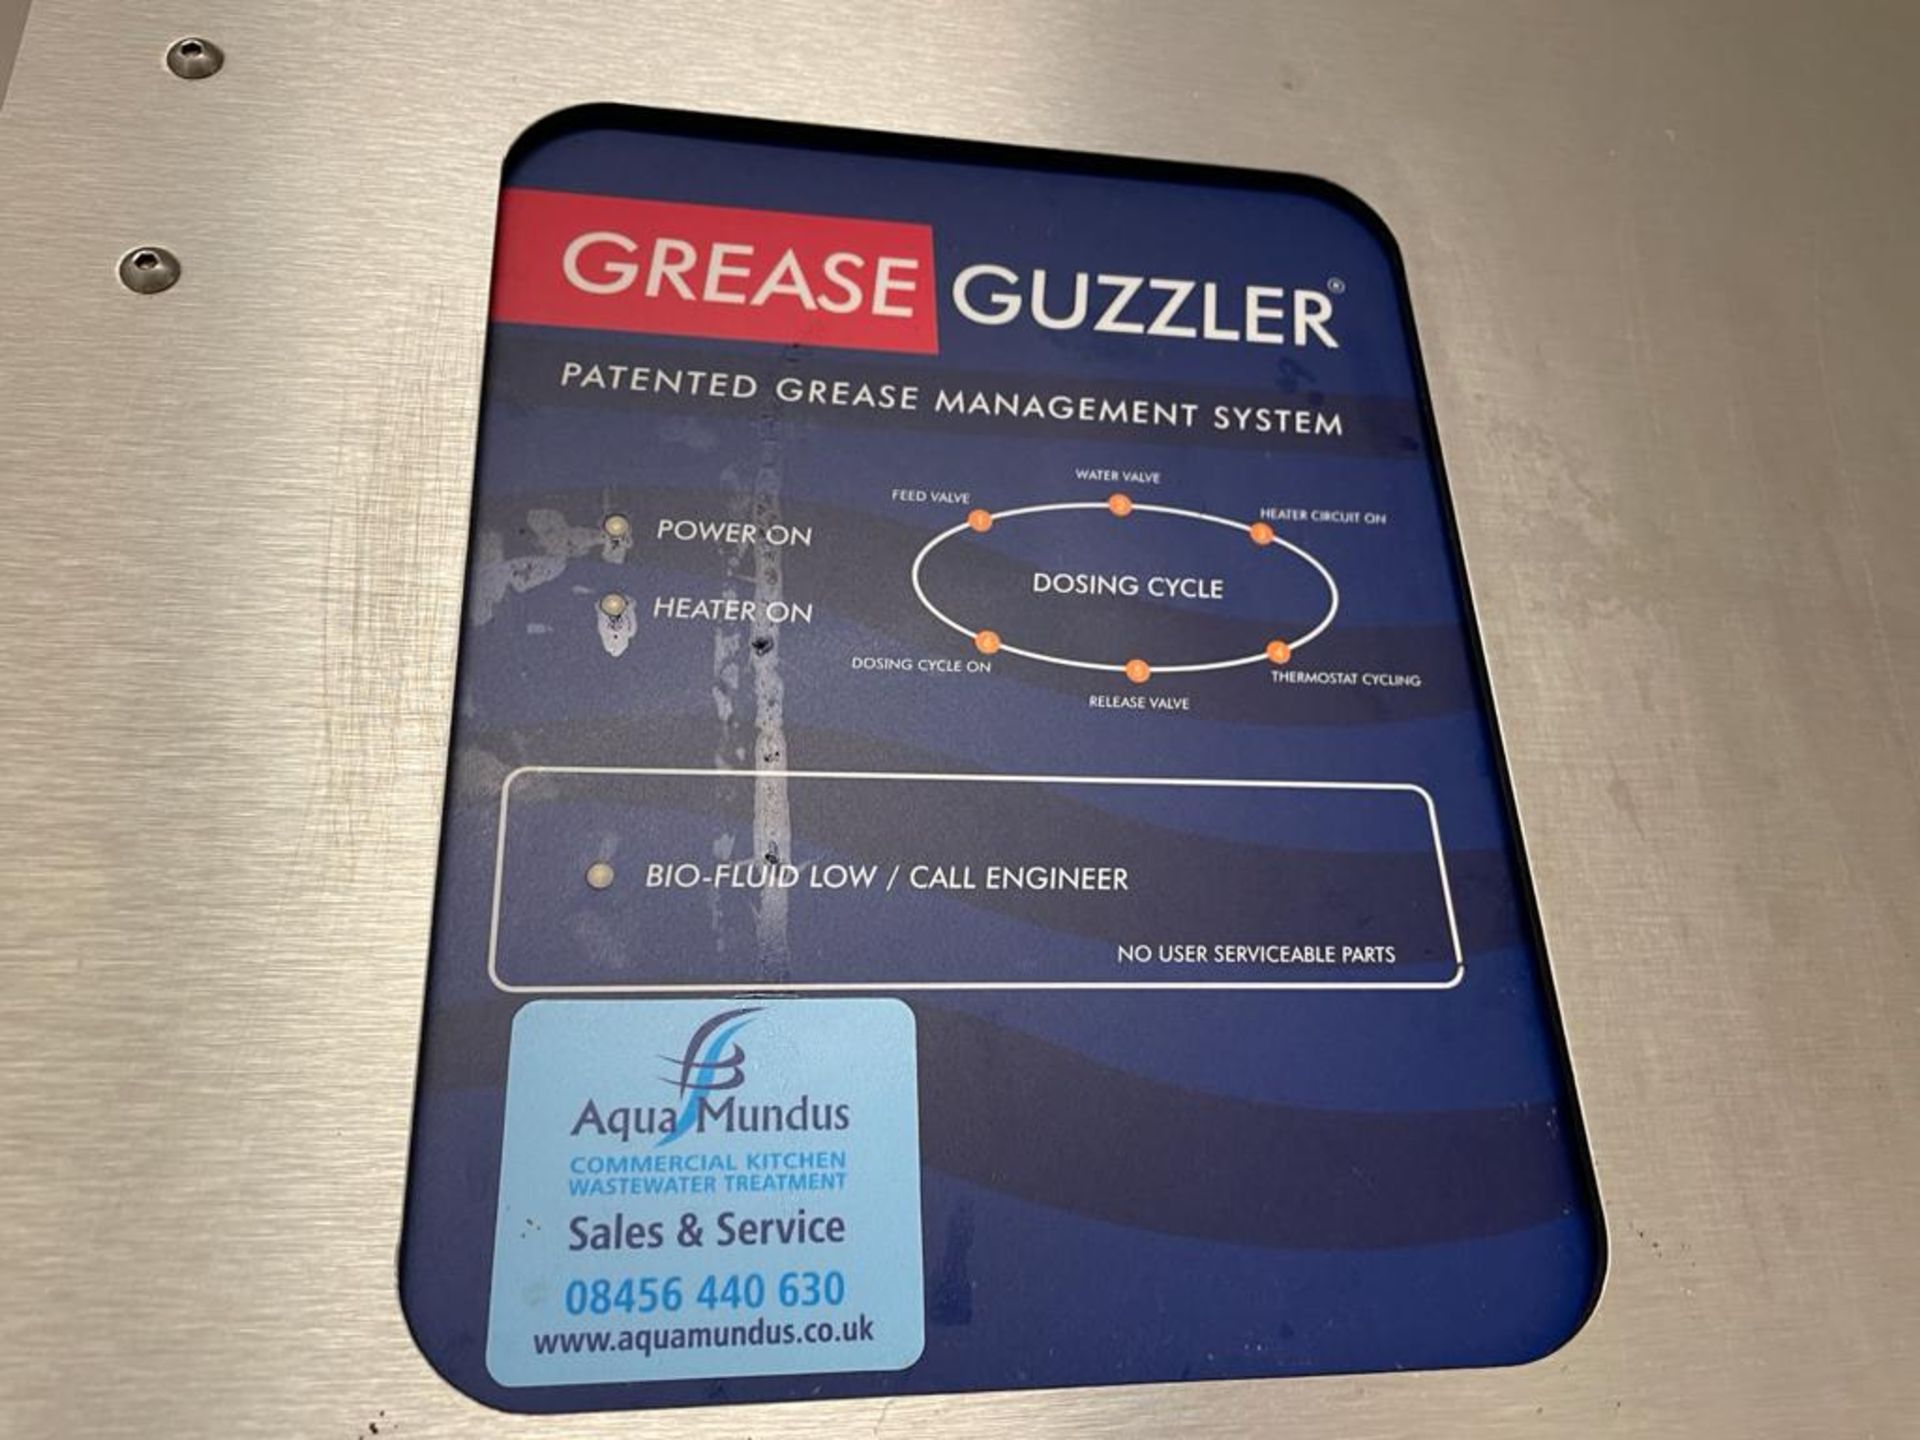 1 x Grease Guzzler - Patented Grease Management System - Model Number DD-620-041 - CL666 - Location: - Image 2 of 5